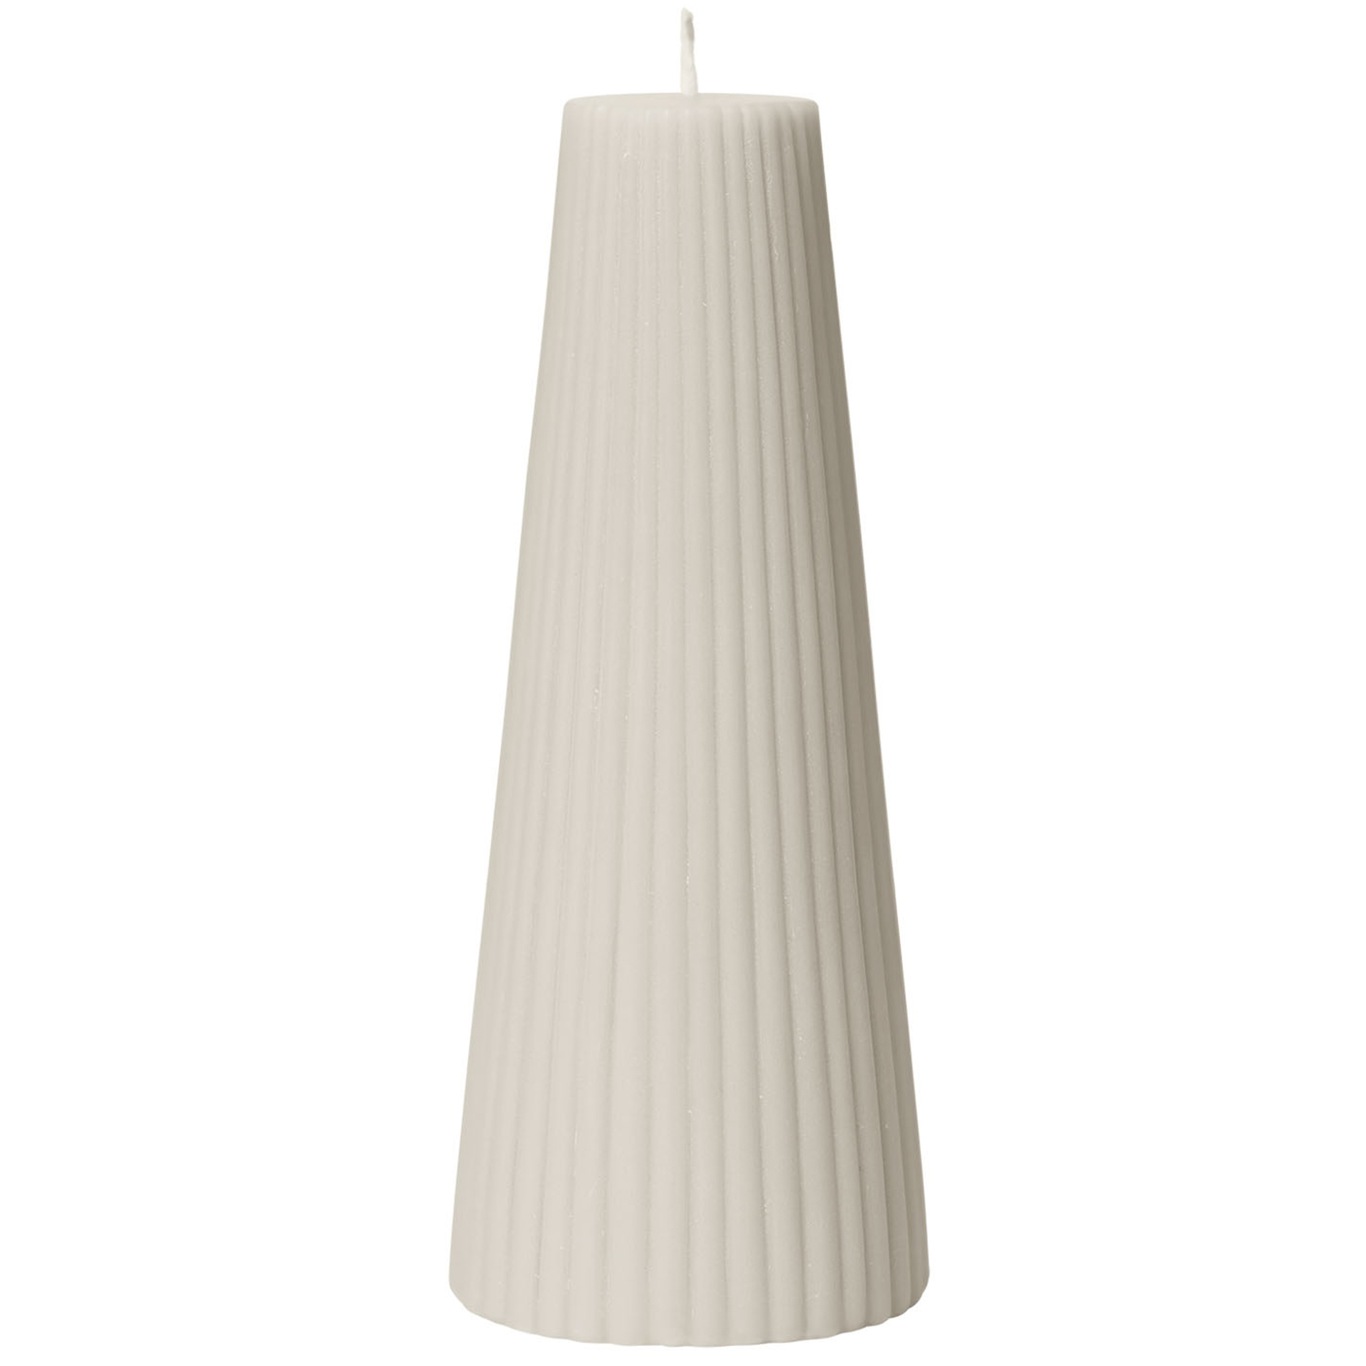 Grooved Trapez Candle, Light Stone